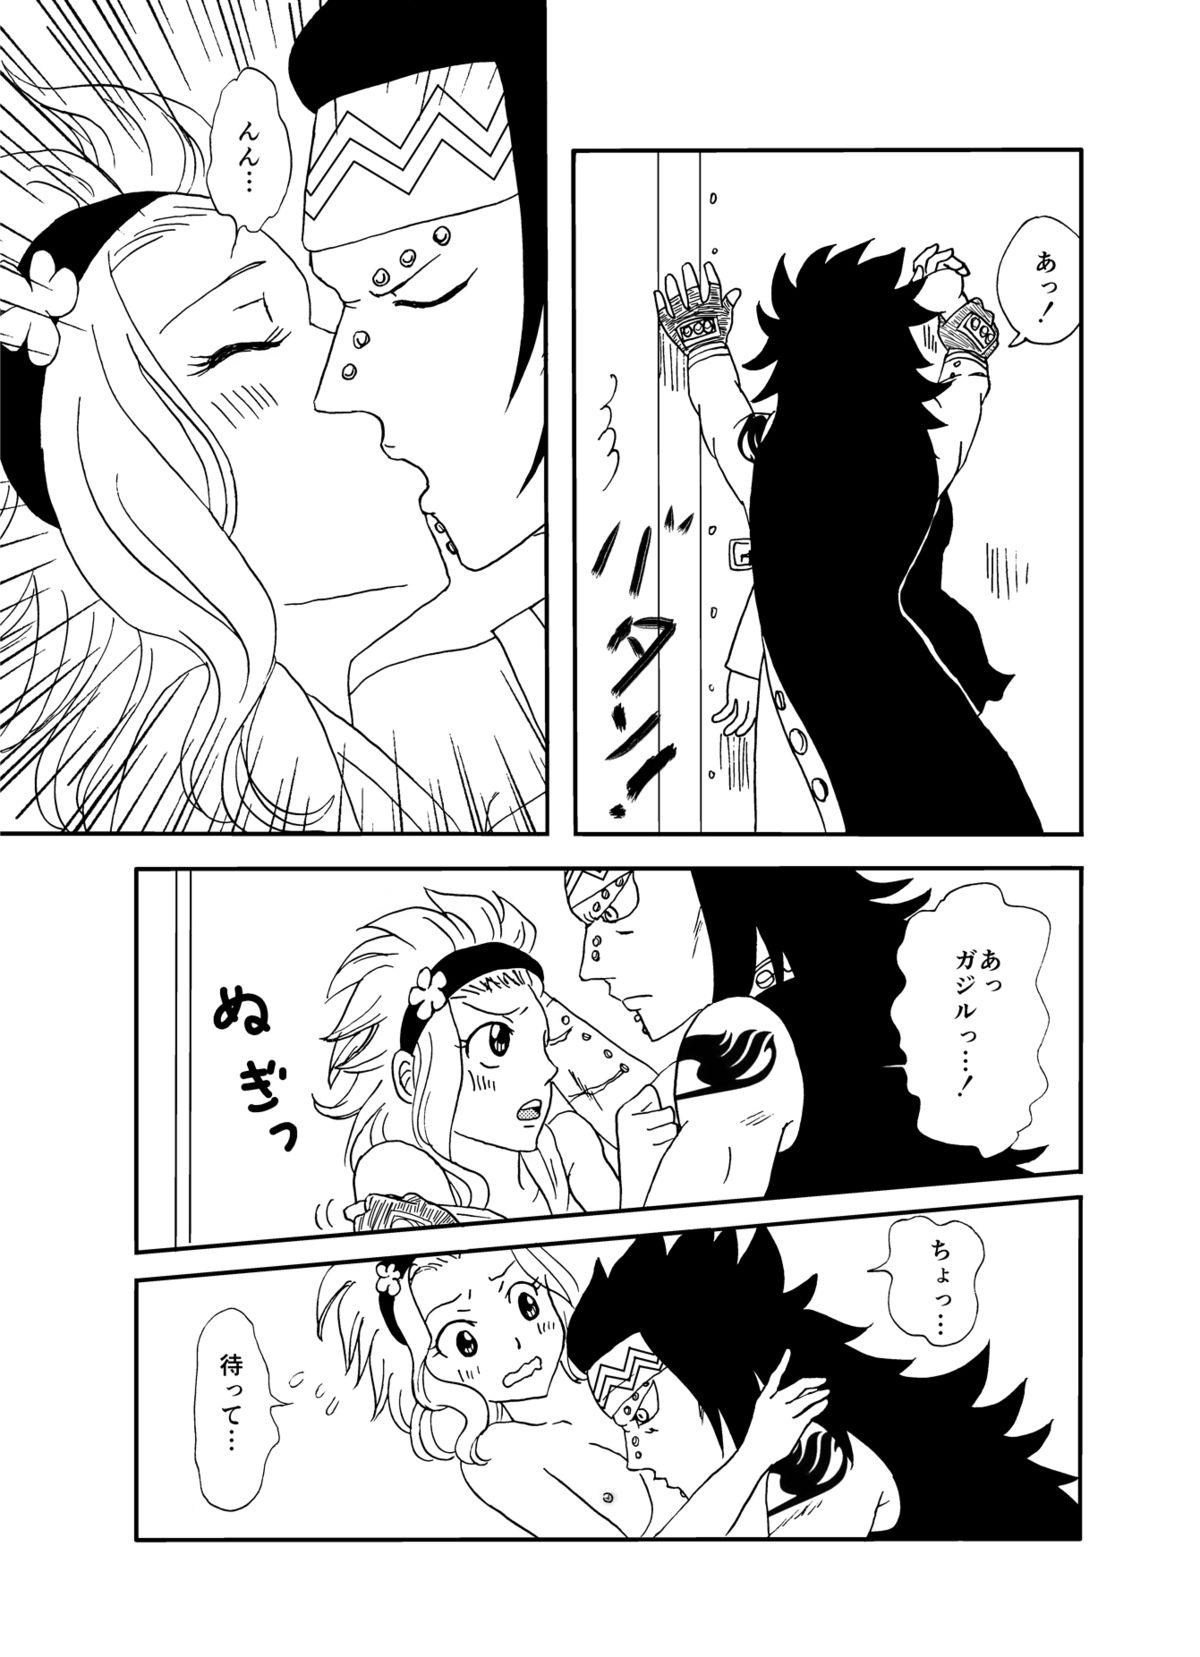 Sesso GajeeLevy Manga 2 - Fairy tail Lesbos - Page 5